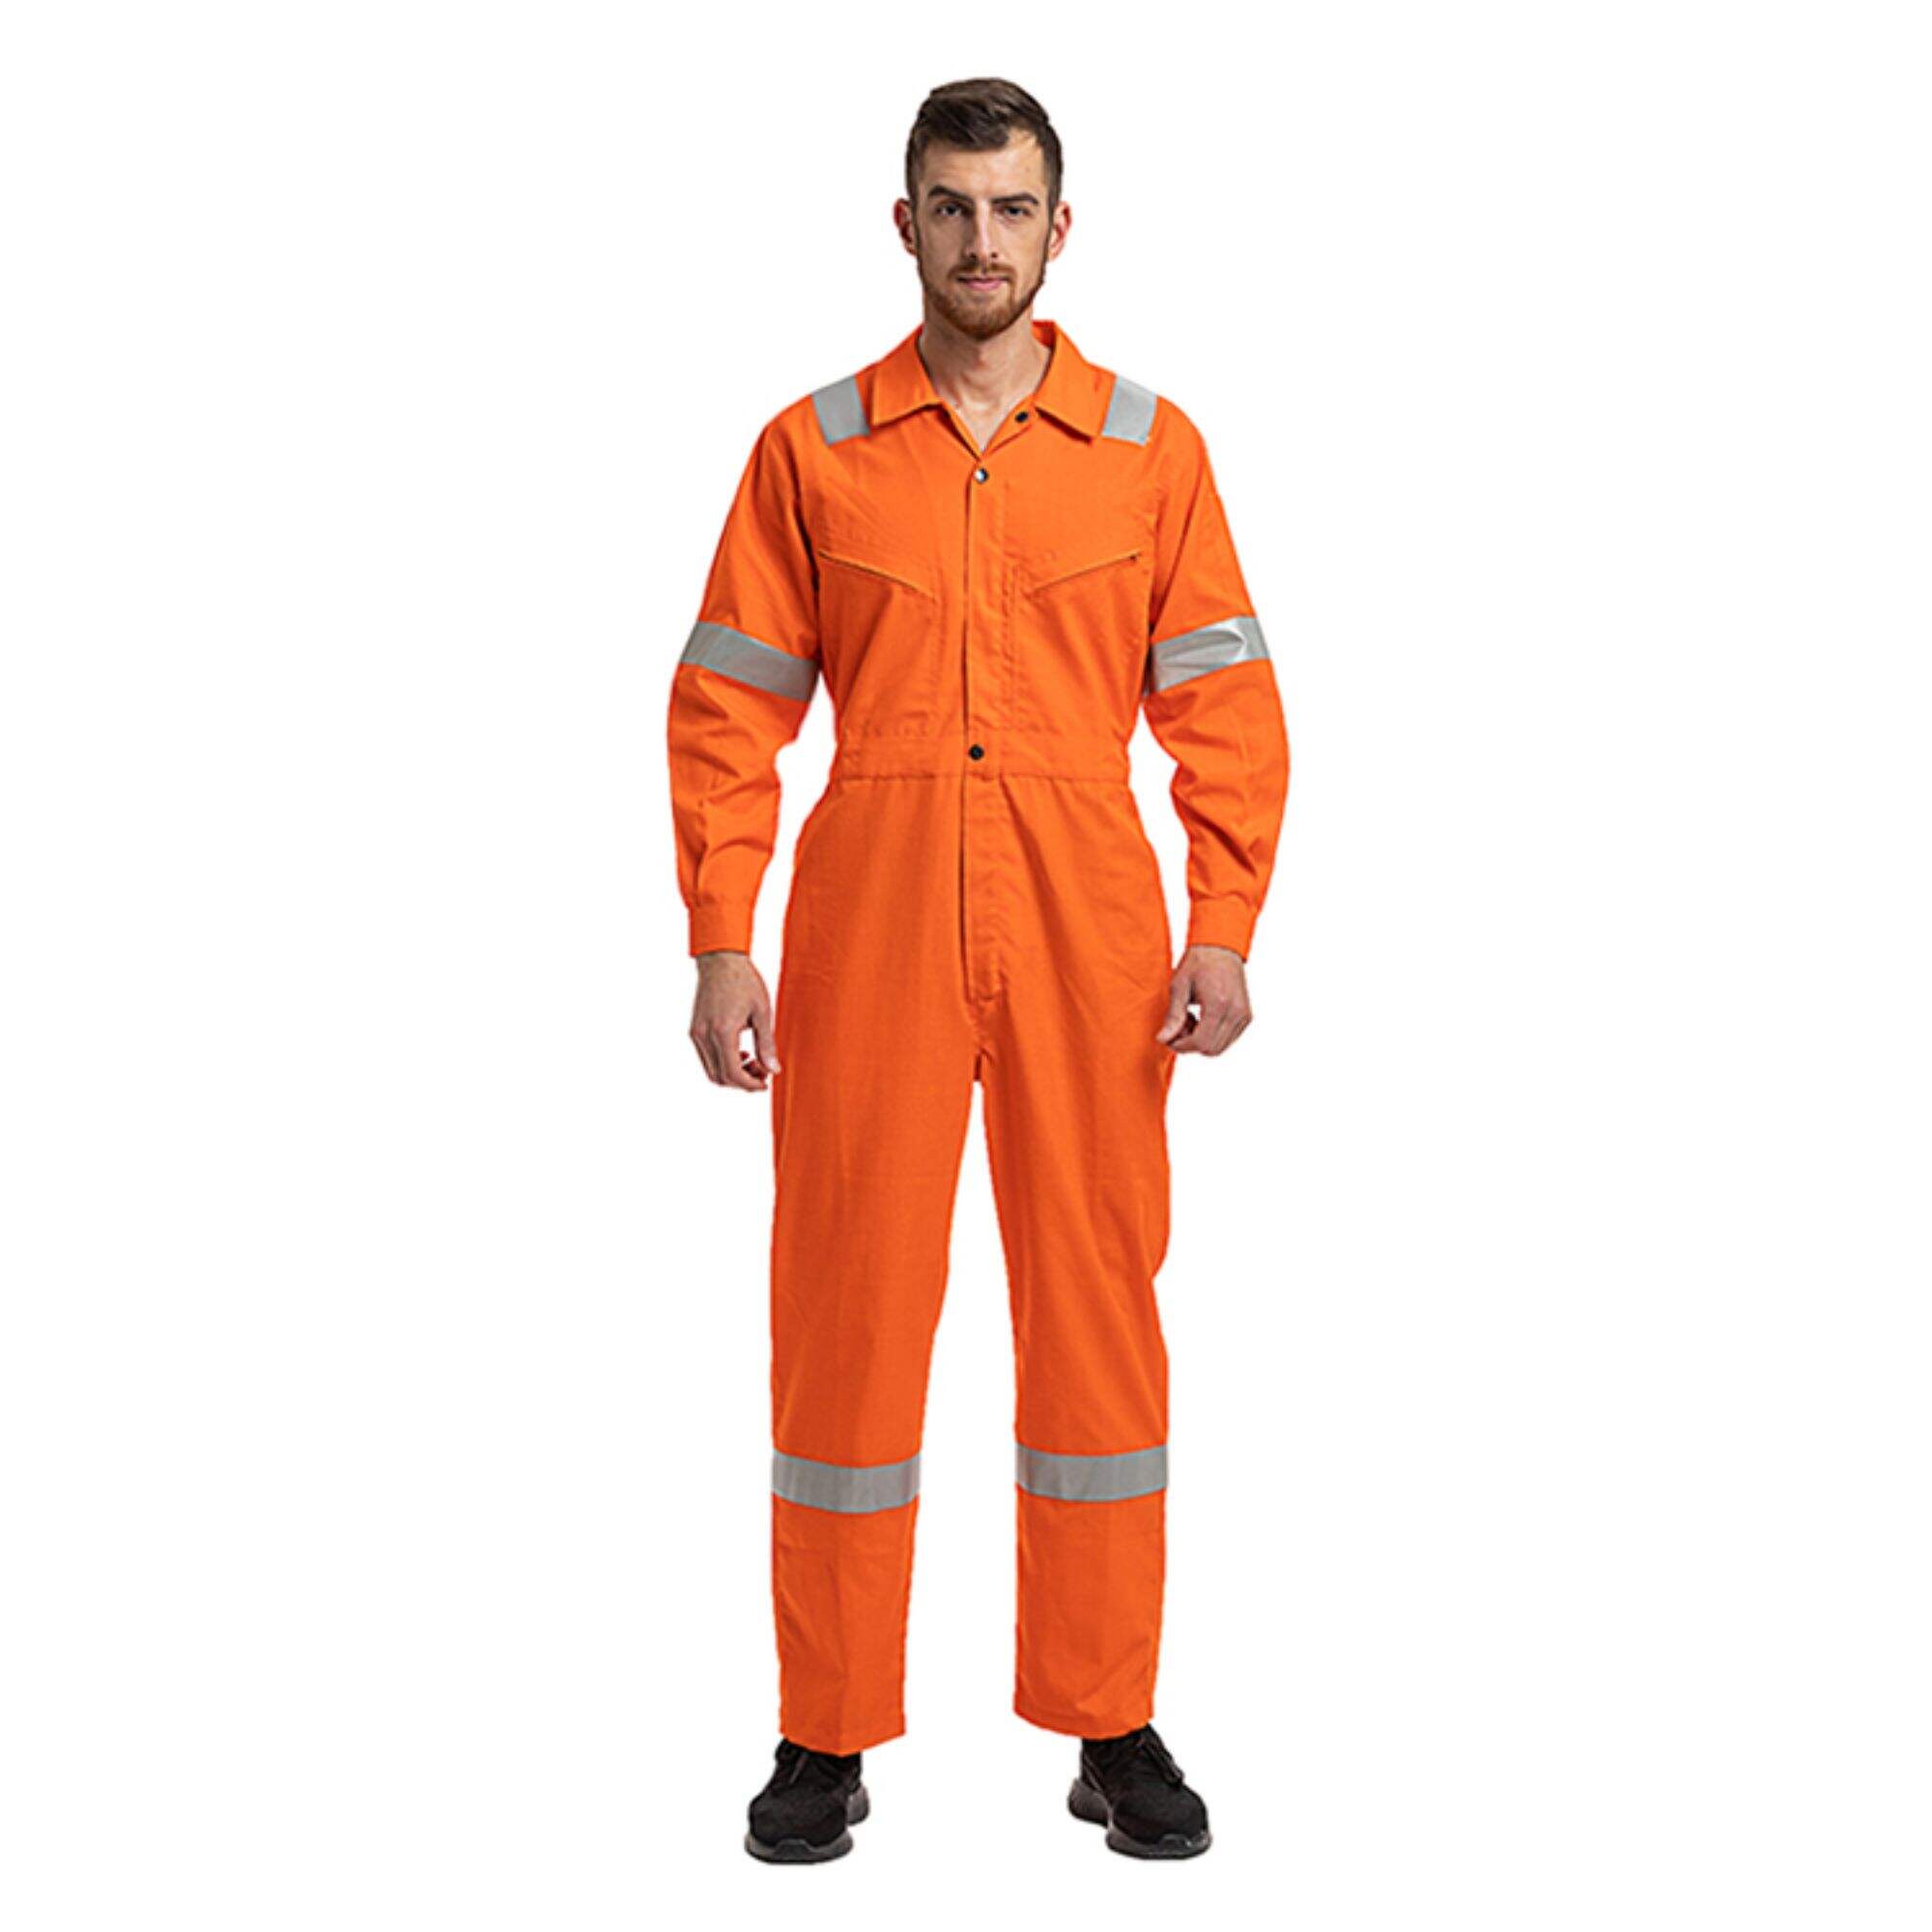 The importance of training workers on proper use of flame resistant coveralls